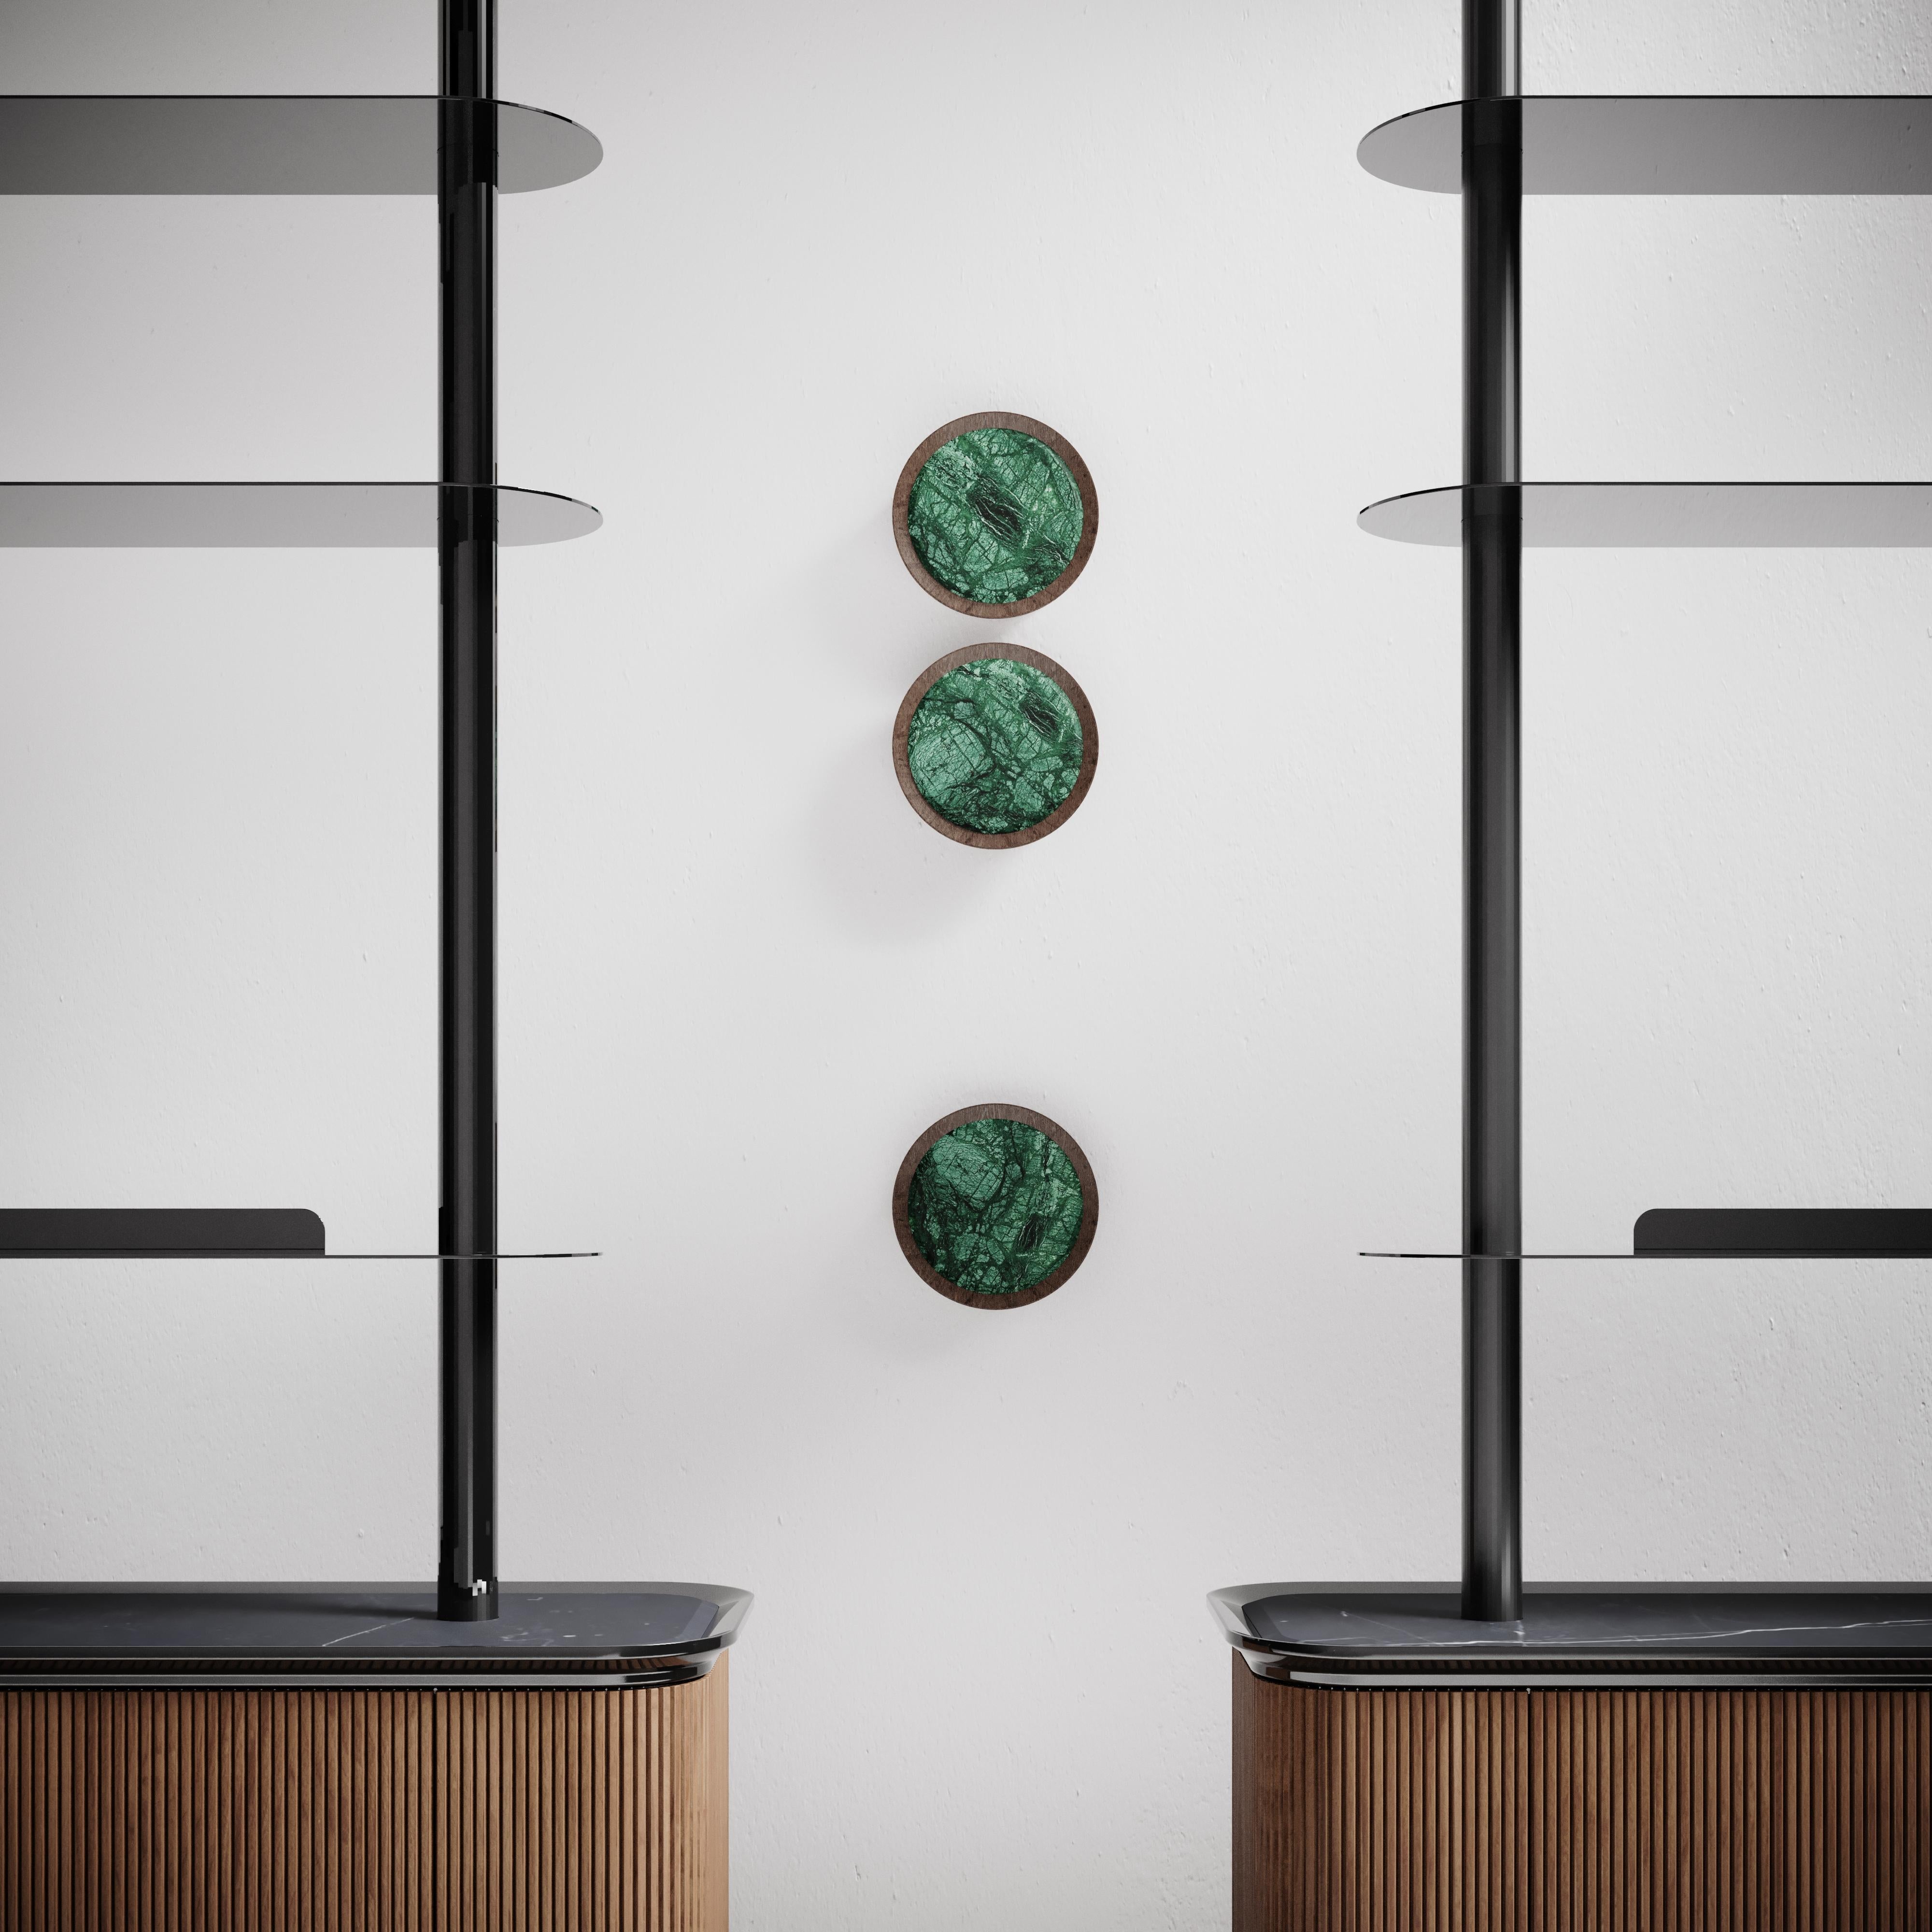 Nemesi #6 is a bookcase and self standing storage unit, designed by SAGARÍA

Classic yet contemporary, essential yet extremely personal, Nemesi #6 wall unit is boldly defined by the two round painted-metal plates to serve as anchor to the wall.